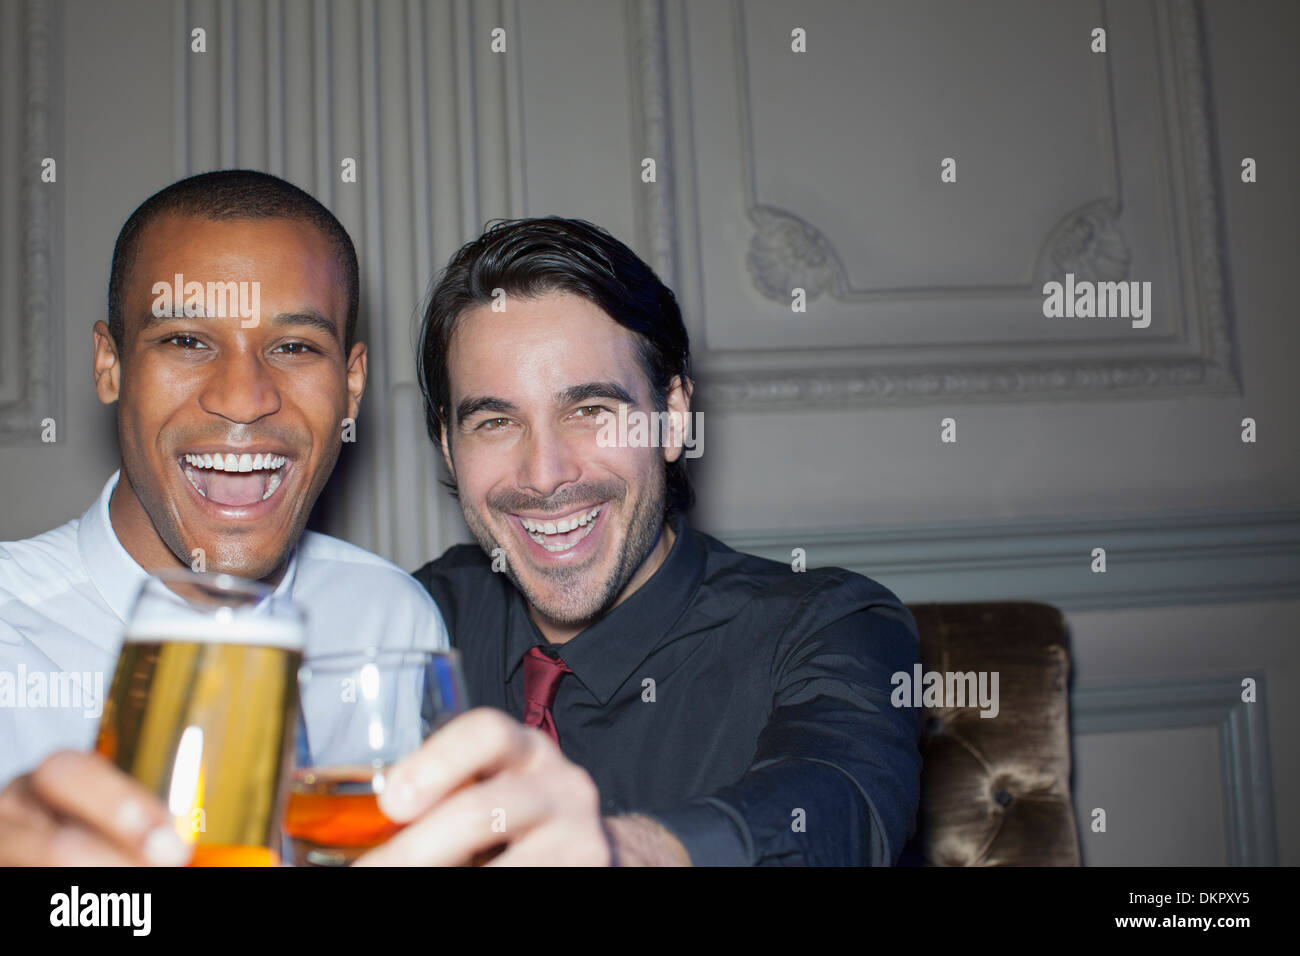 Close up portrait of smiling men toasting beer and cocktail Banque D'Images